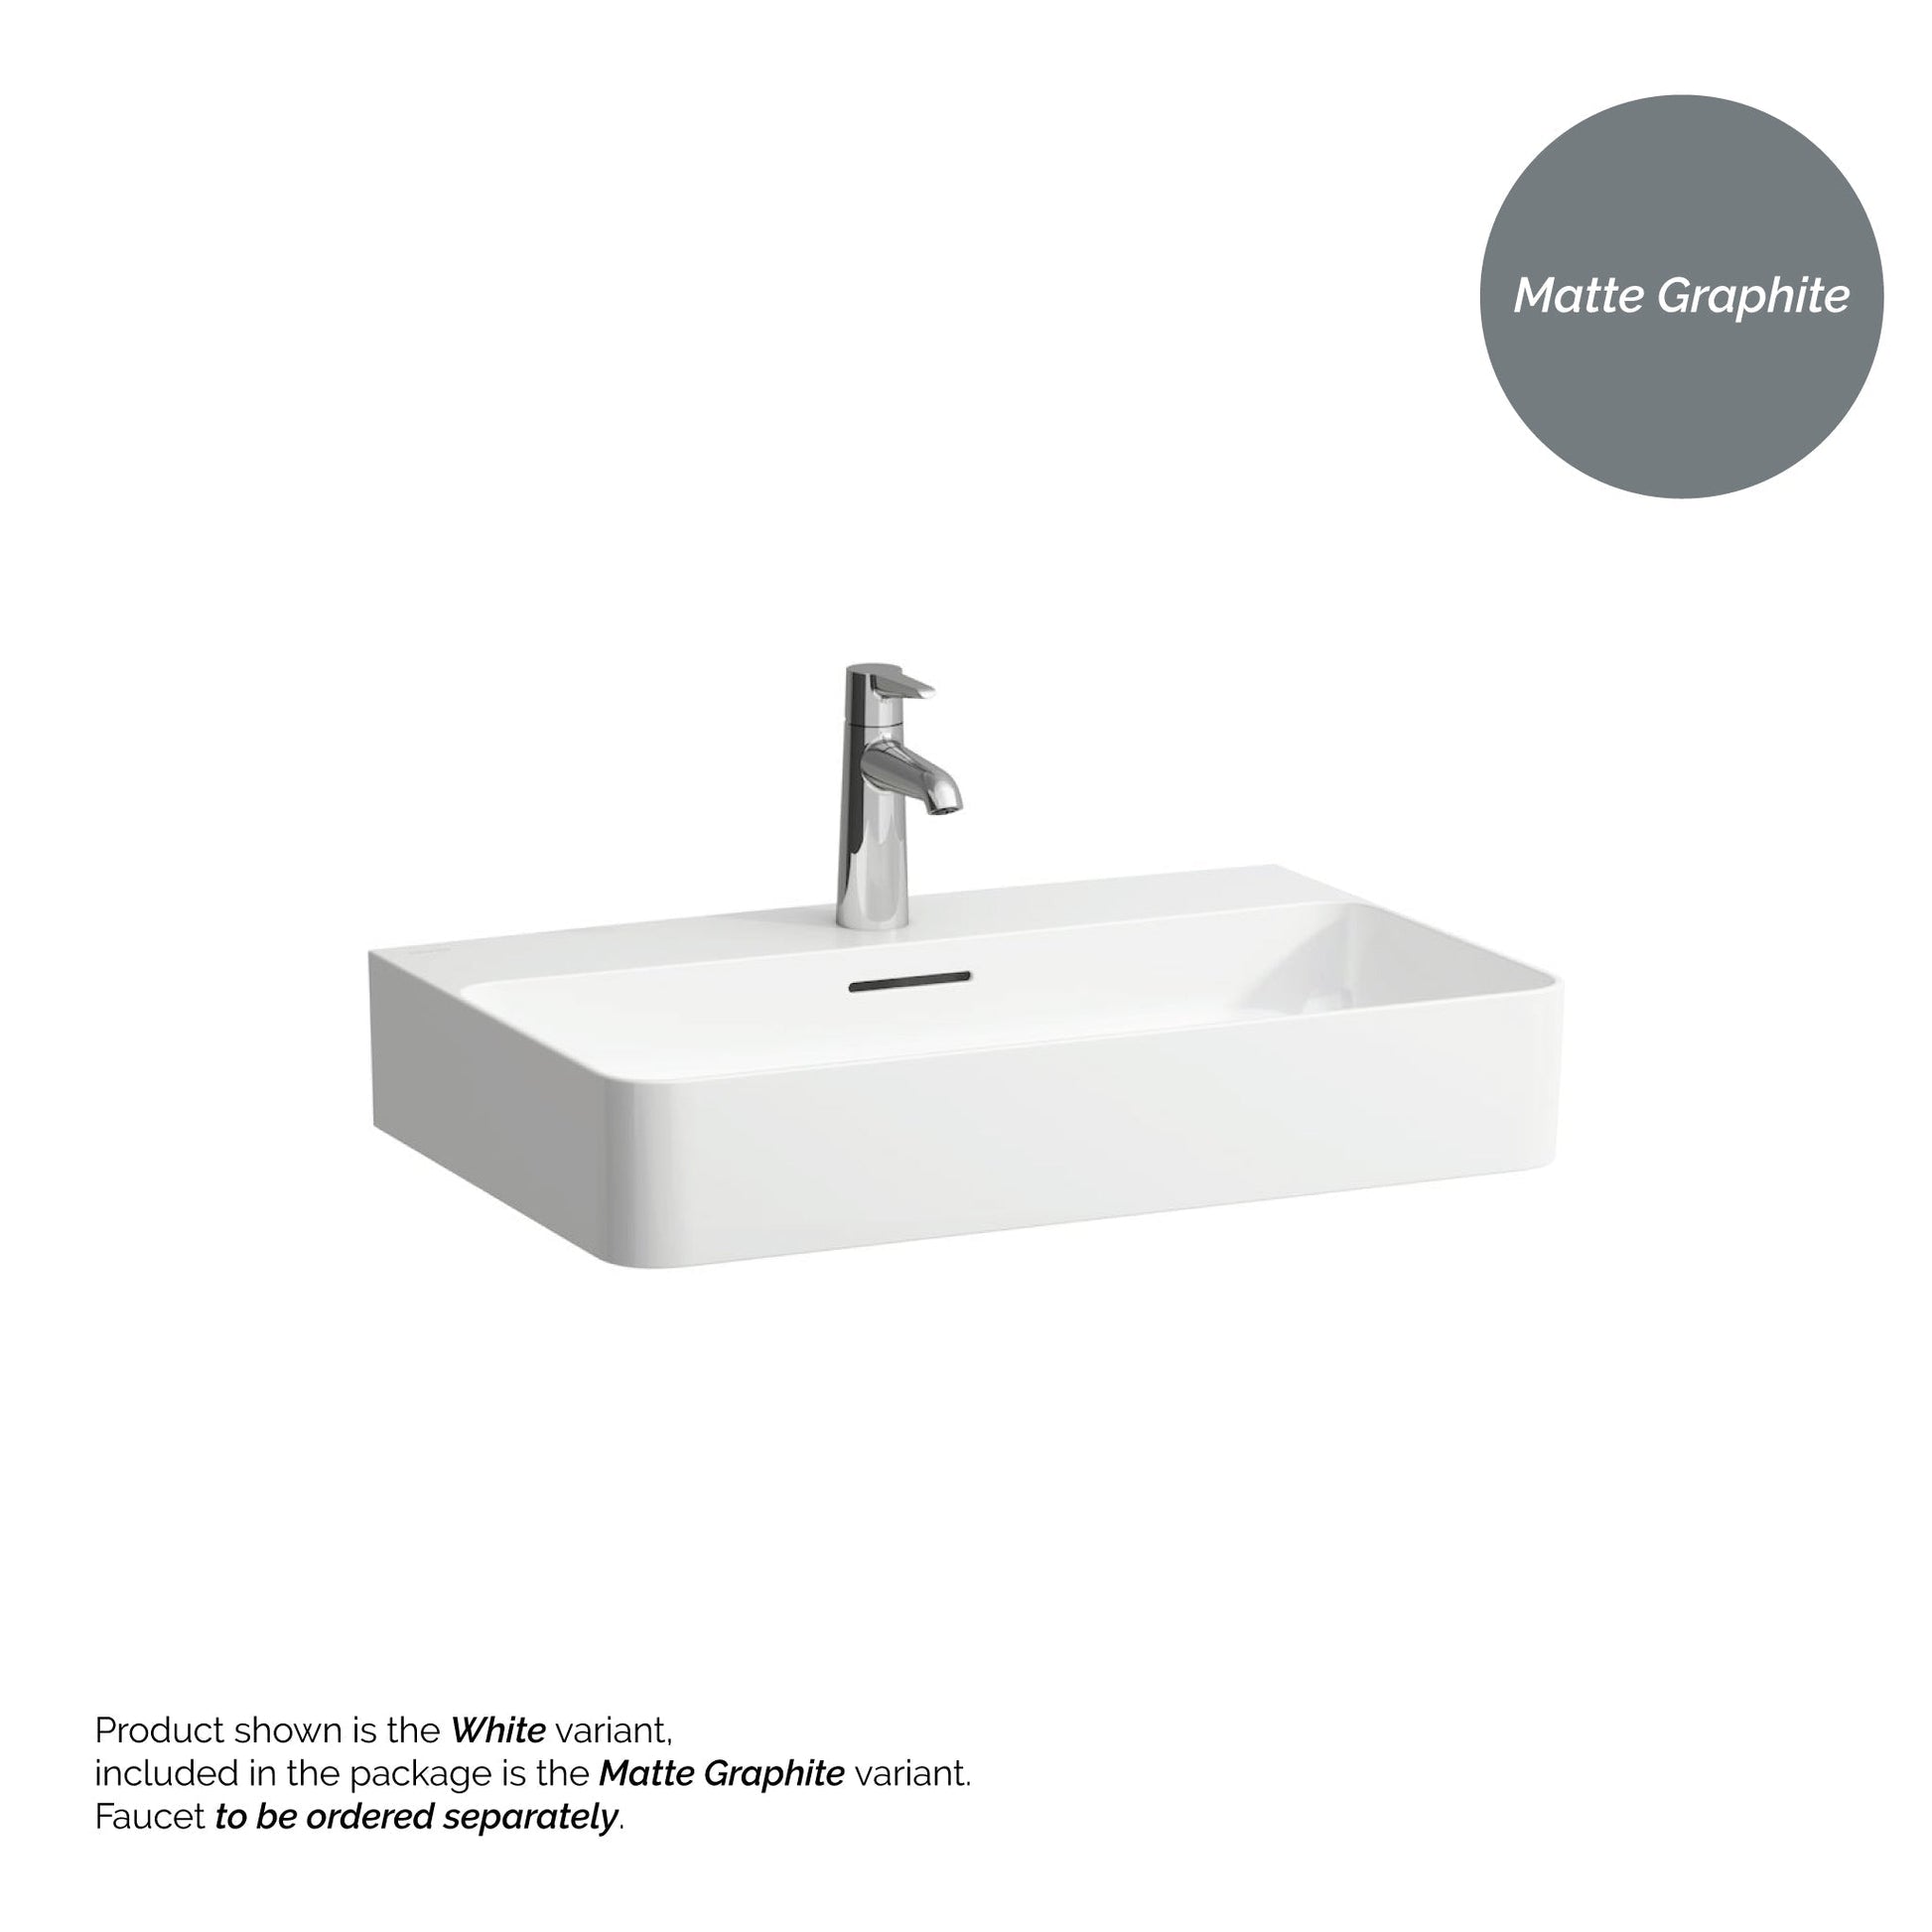 Laufen Val 26" x 17" Matte Graphite Ceramic Wall-Mounted Bathroom Sink With Faucet Hole